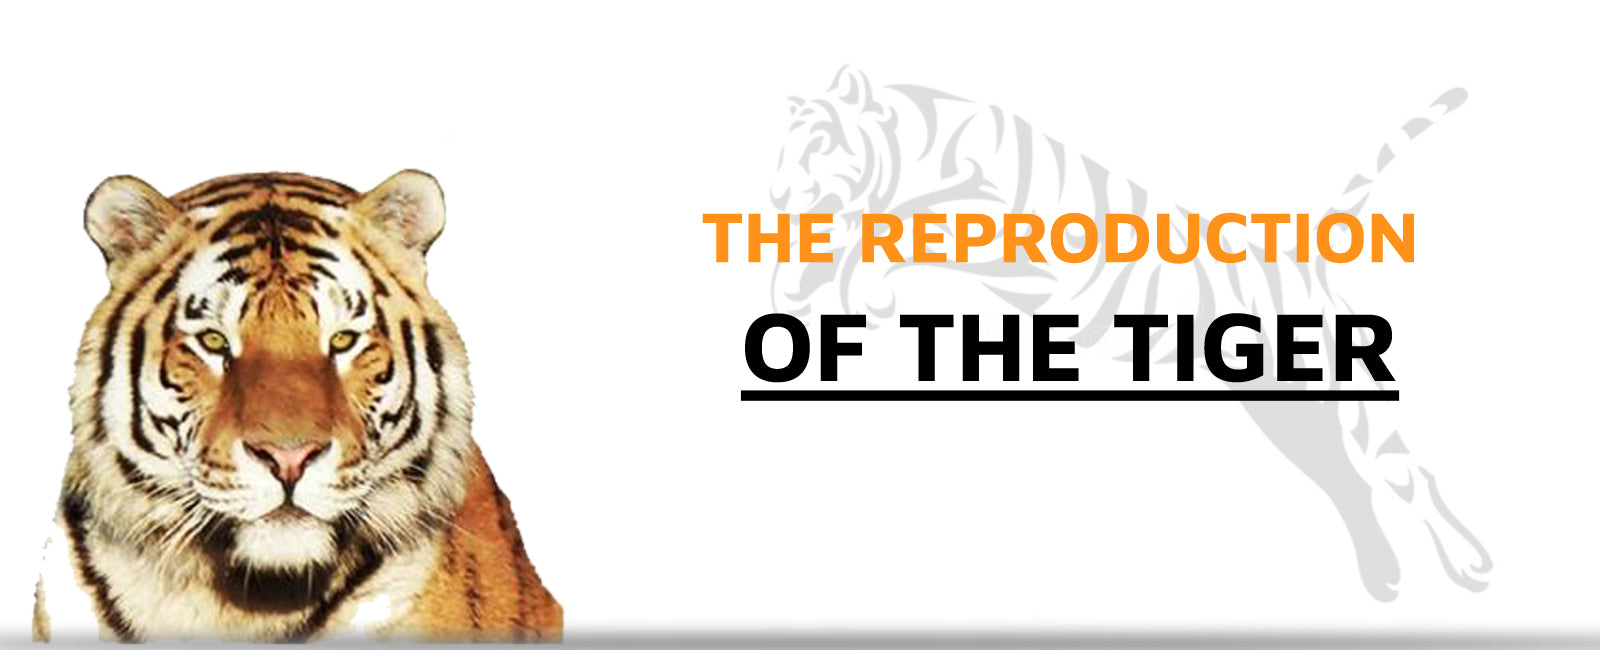 How do Tigers Reproduce?